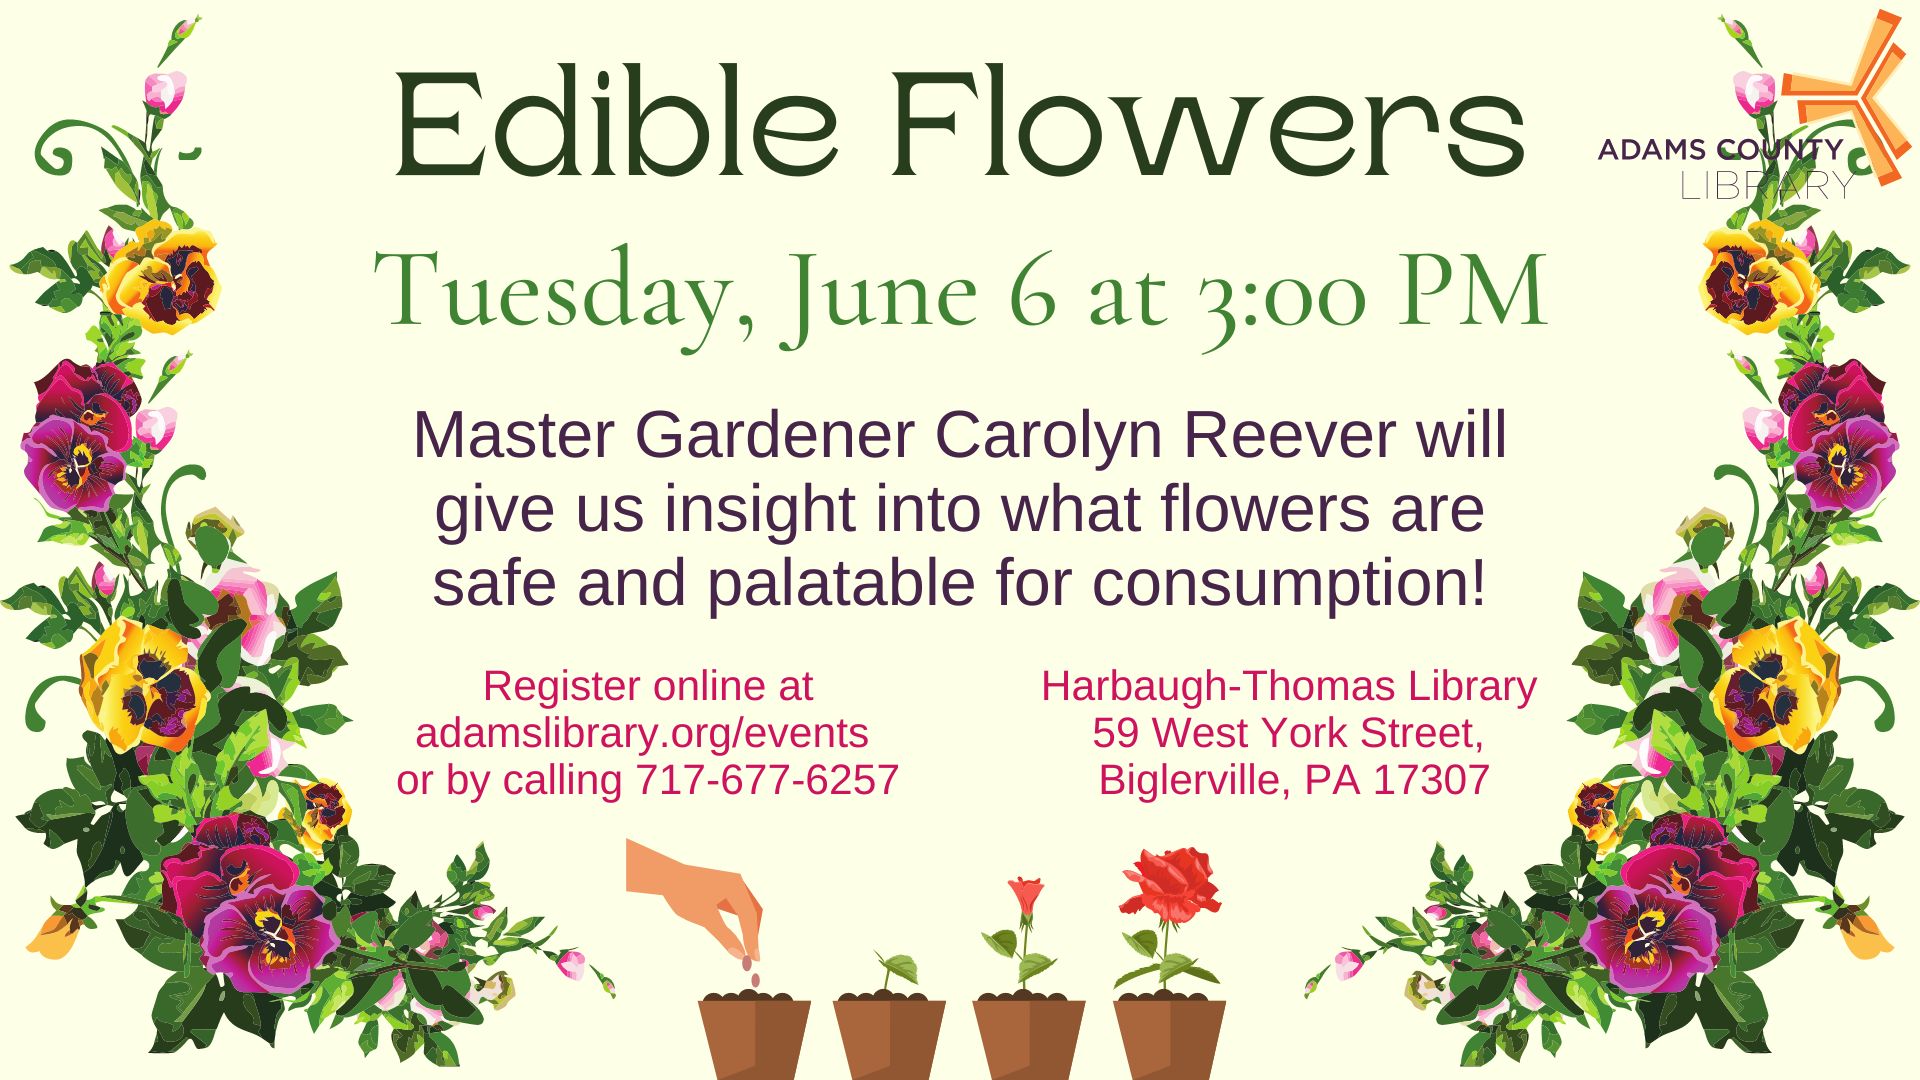 Edible Flowers Tuesday June 6 at 3:00 PM